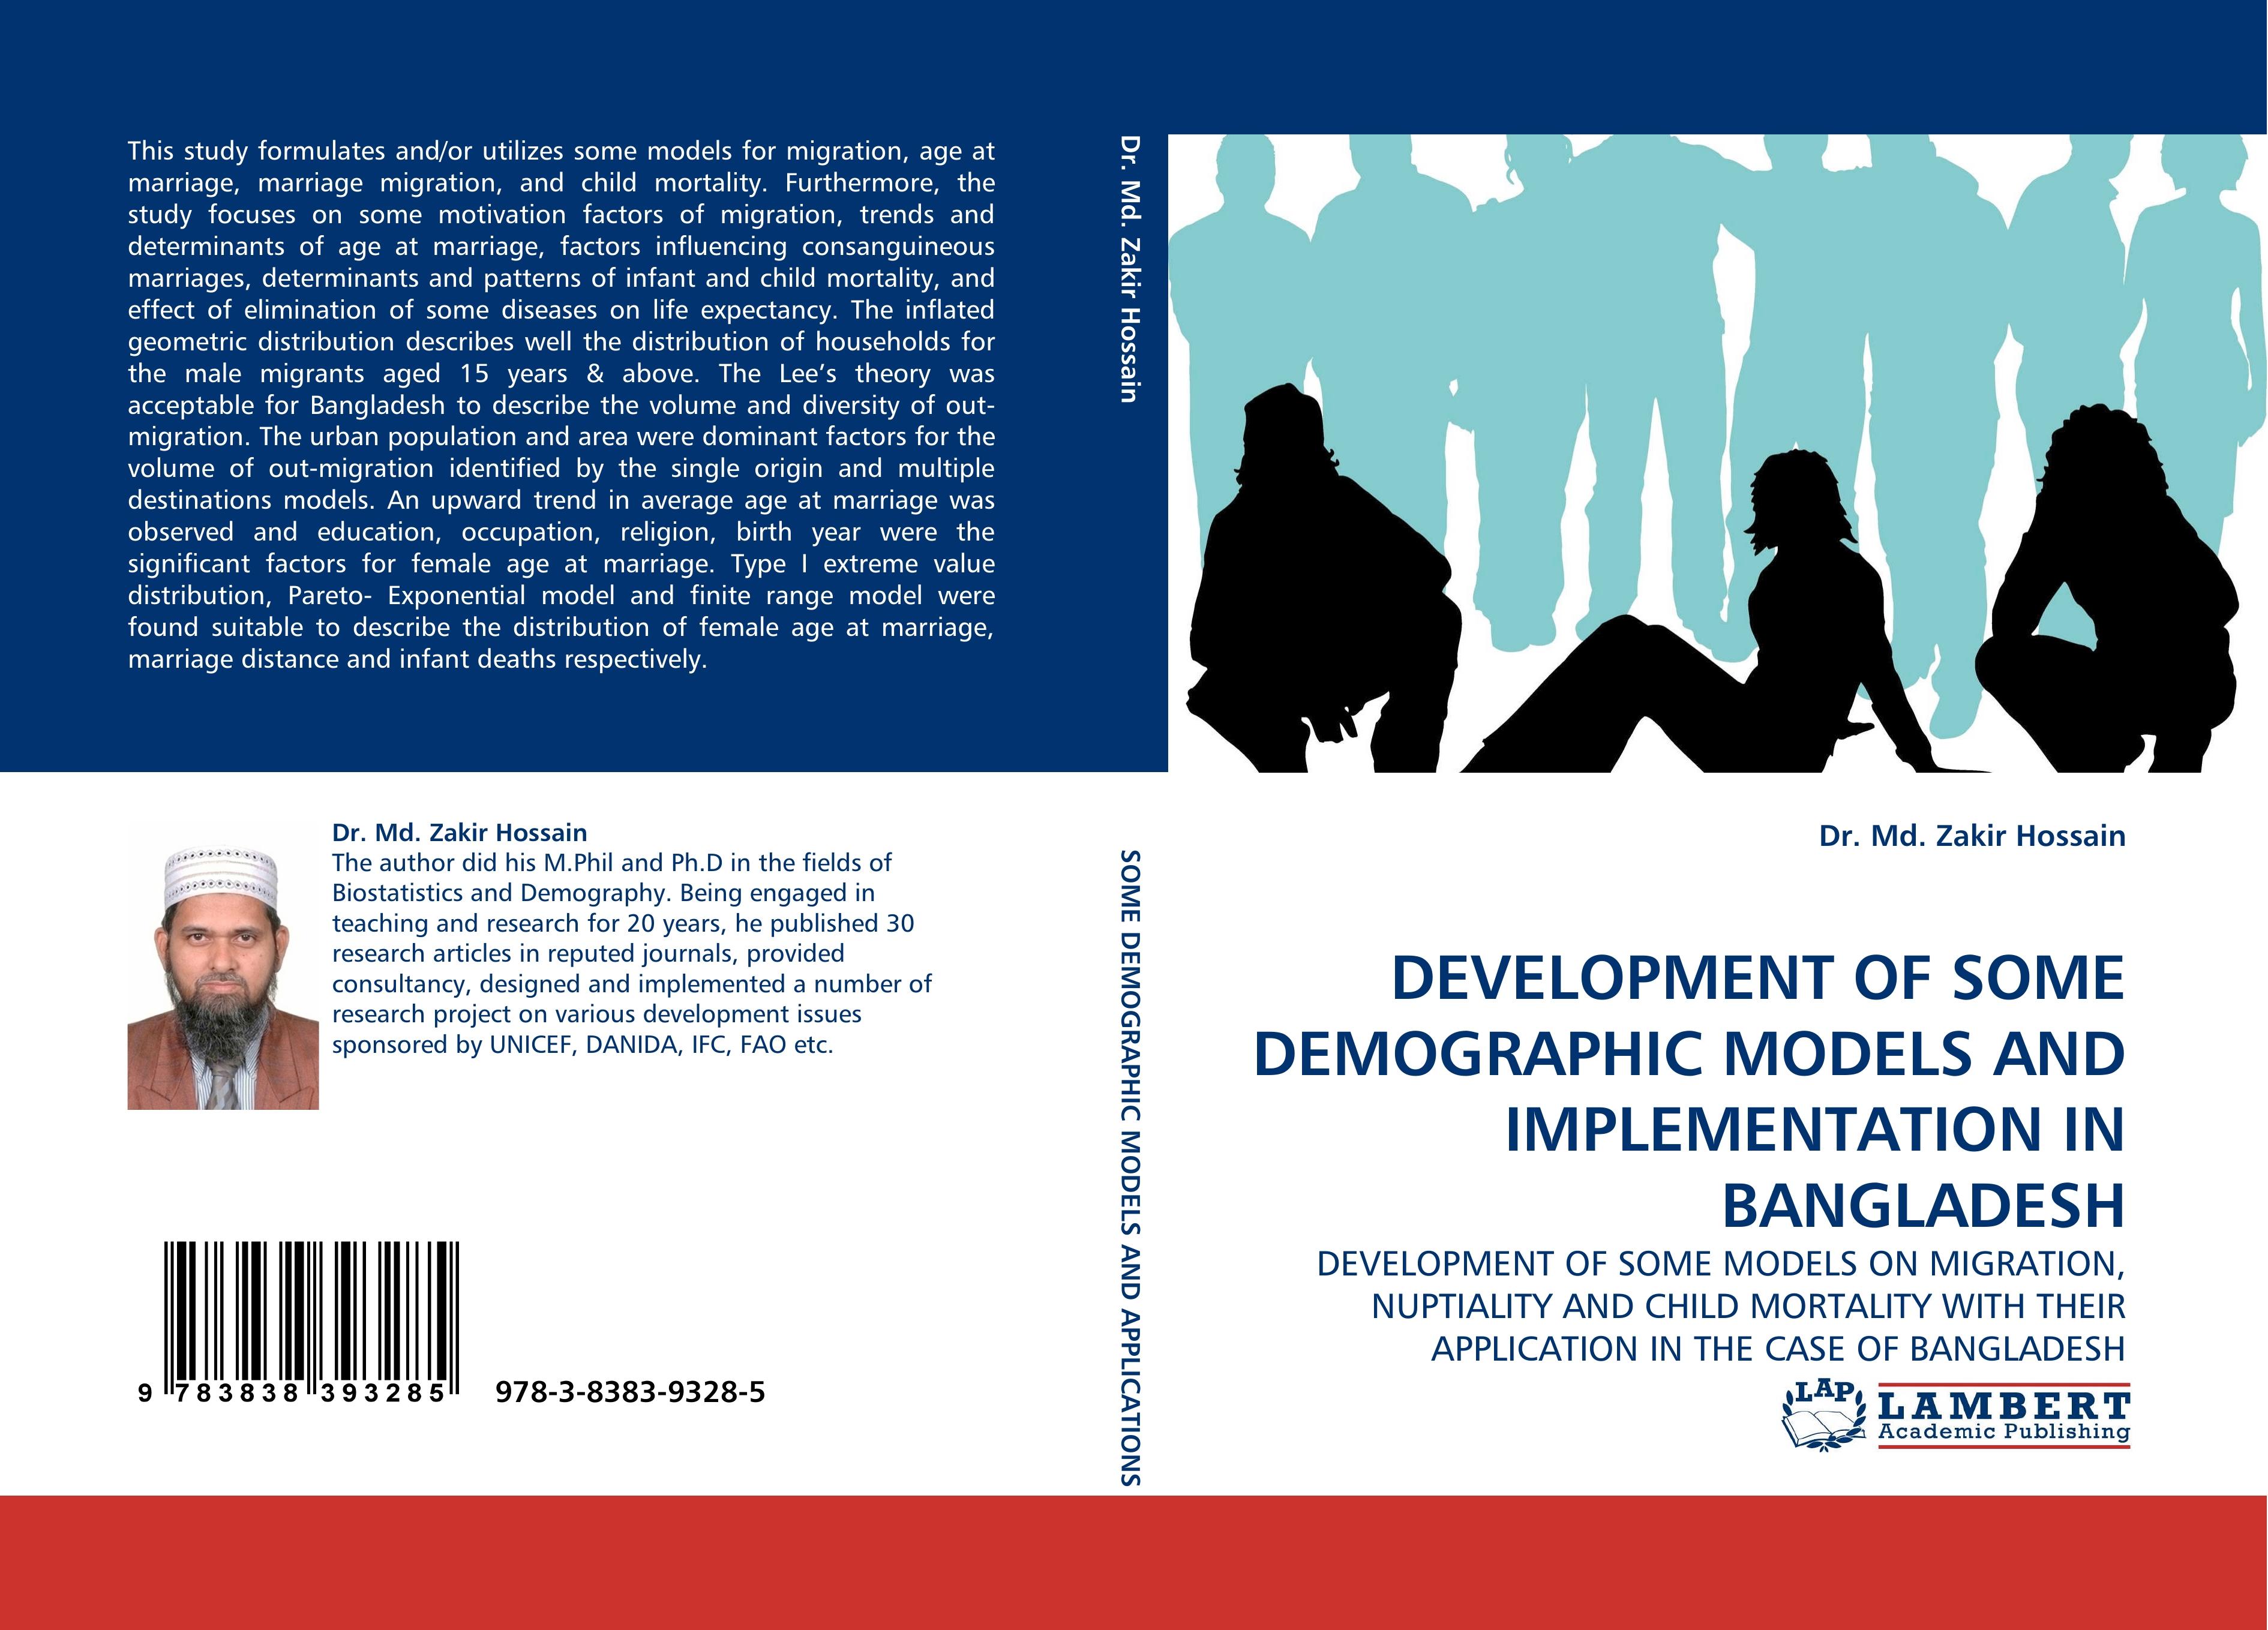 DEVELOPMENT OF SOME DEMOGRAPHIC MODELS AND IMPLEMENTATION IN BANGLADESH - Dr. Md. Zakir Hossain